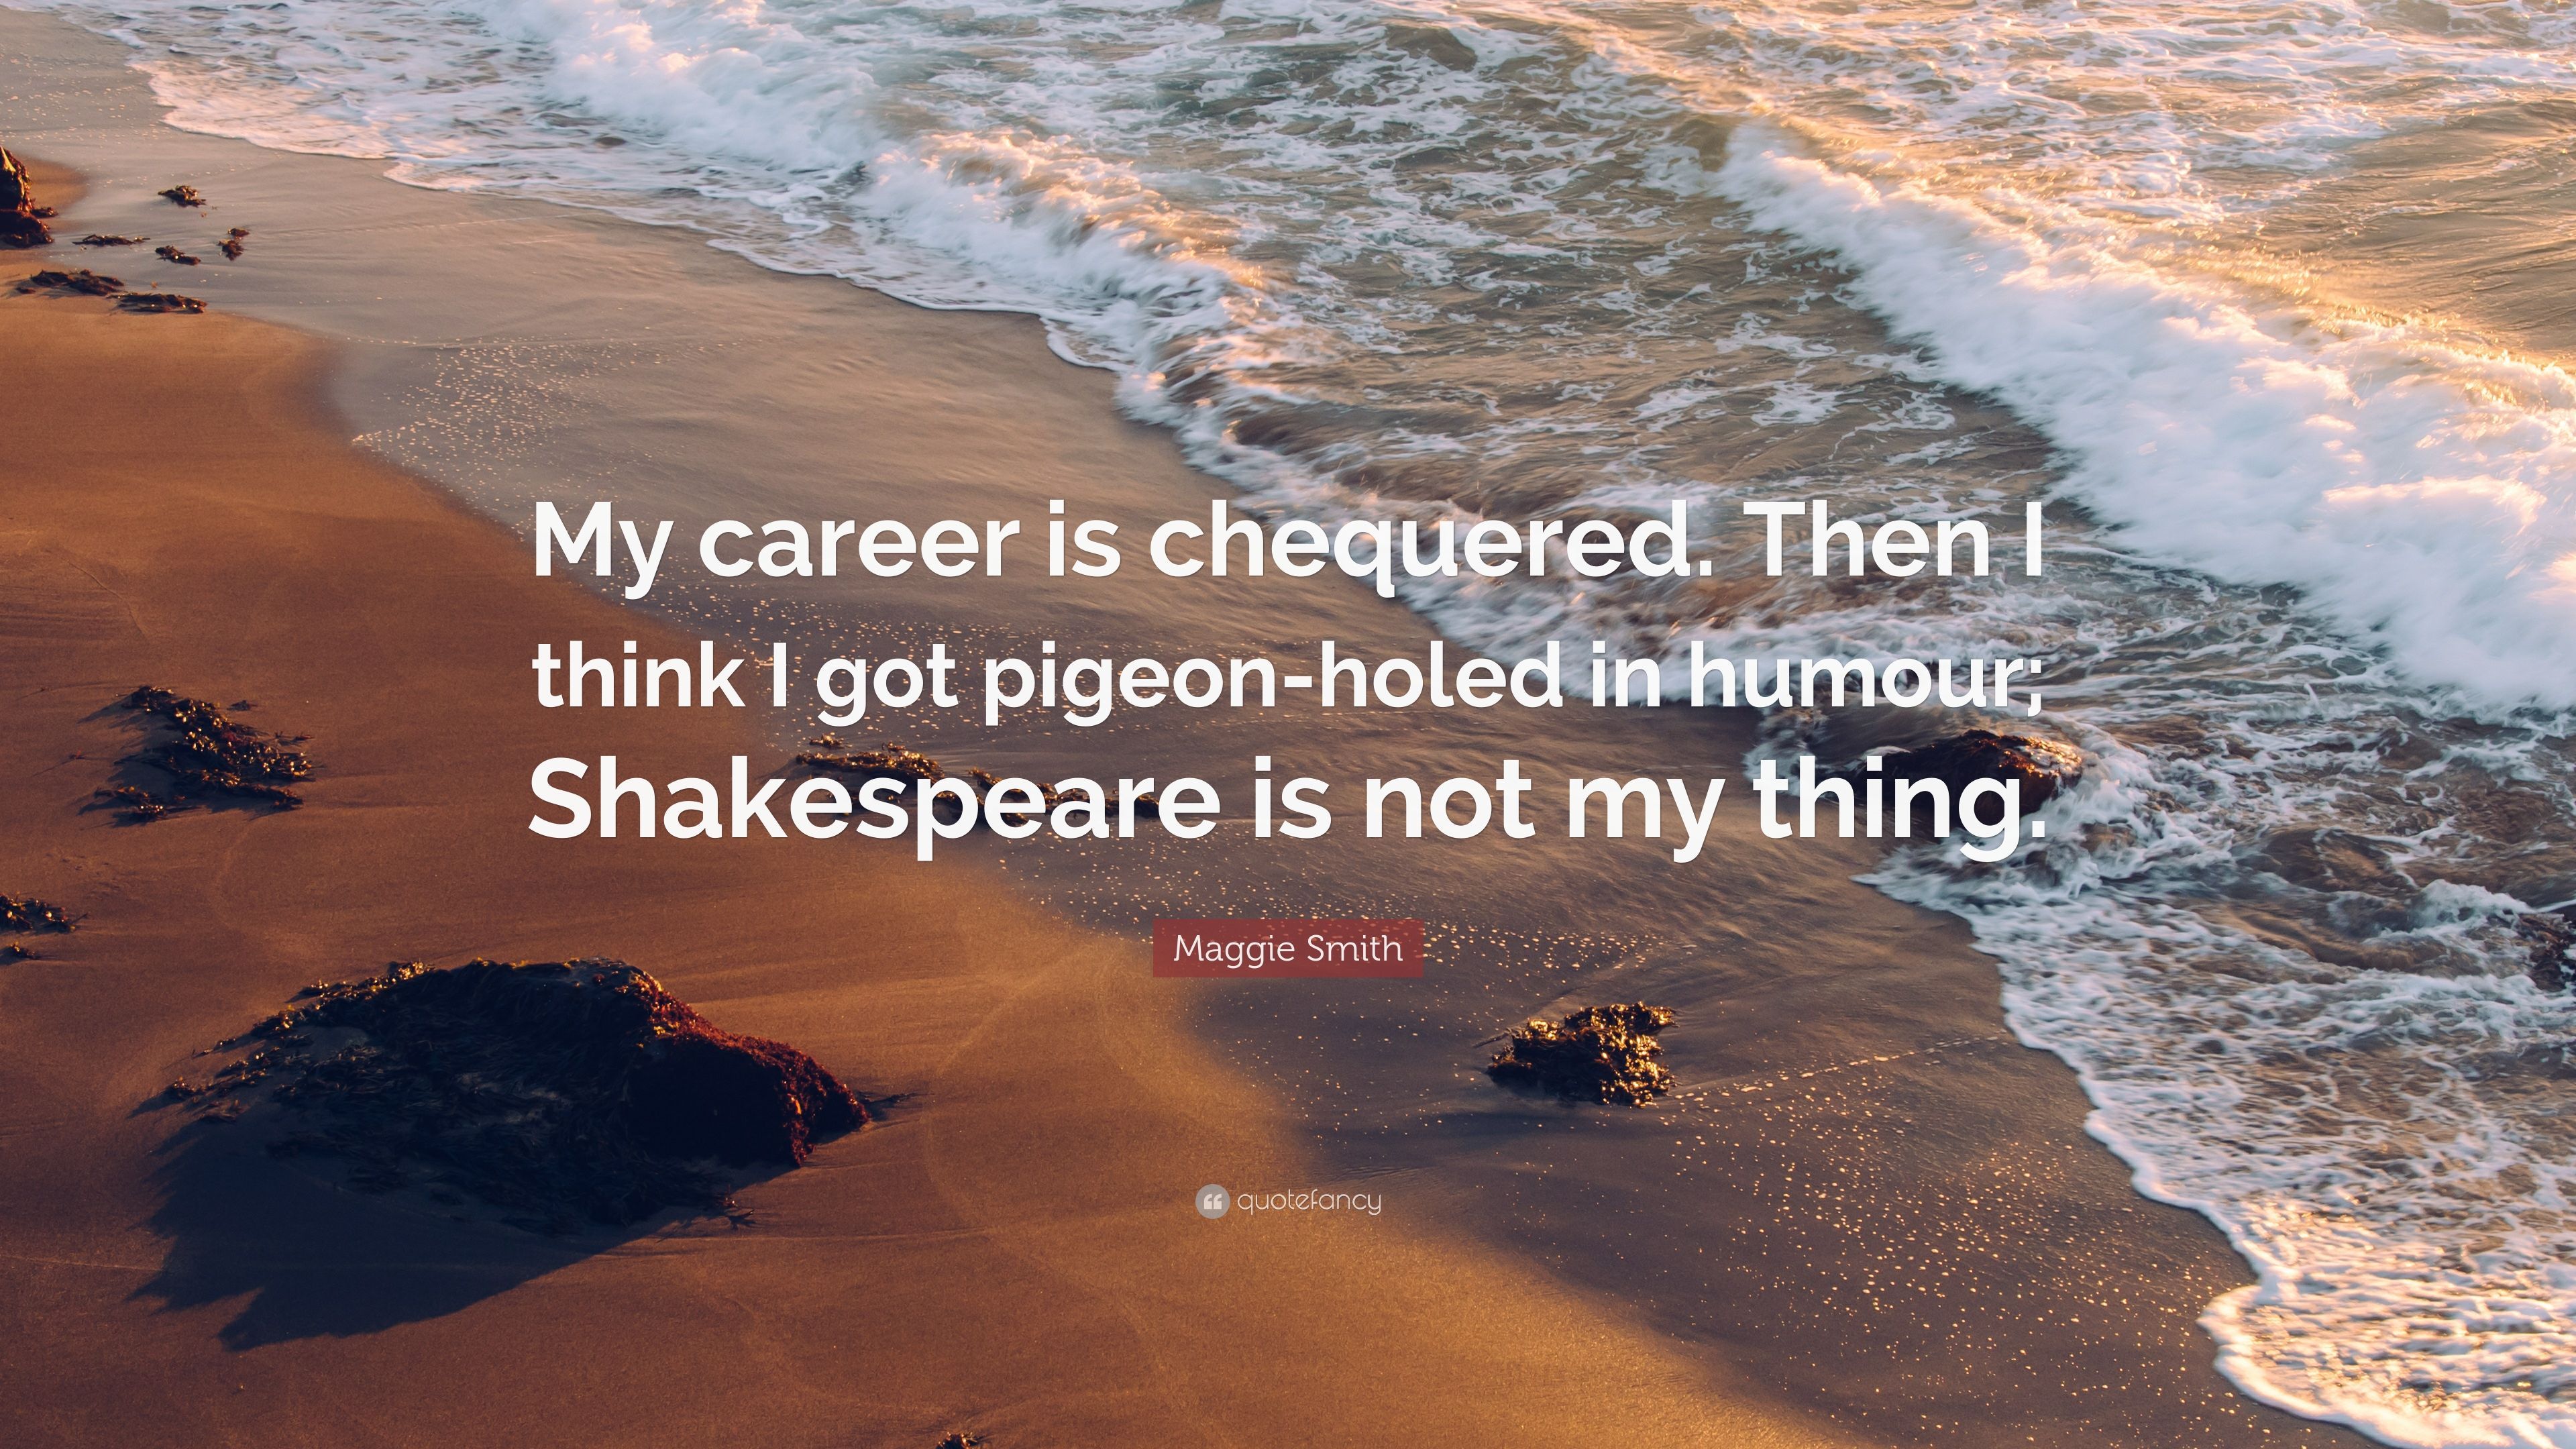 Maggie Smith Quote: “My career is chequered. Then I think I got